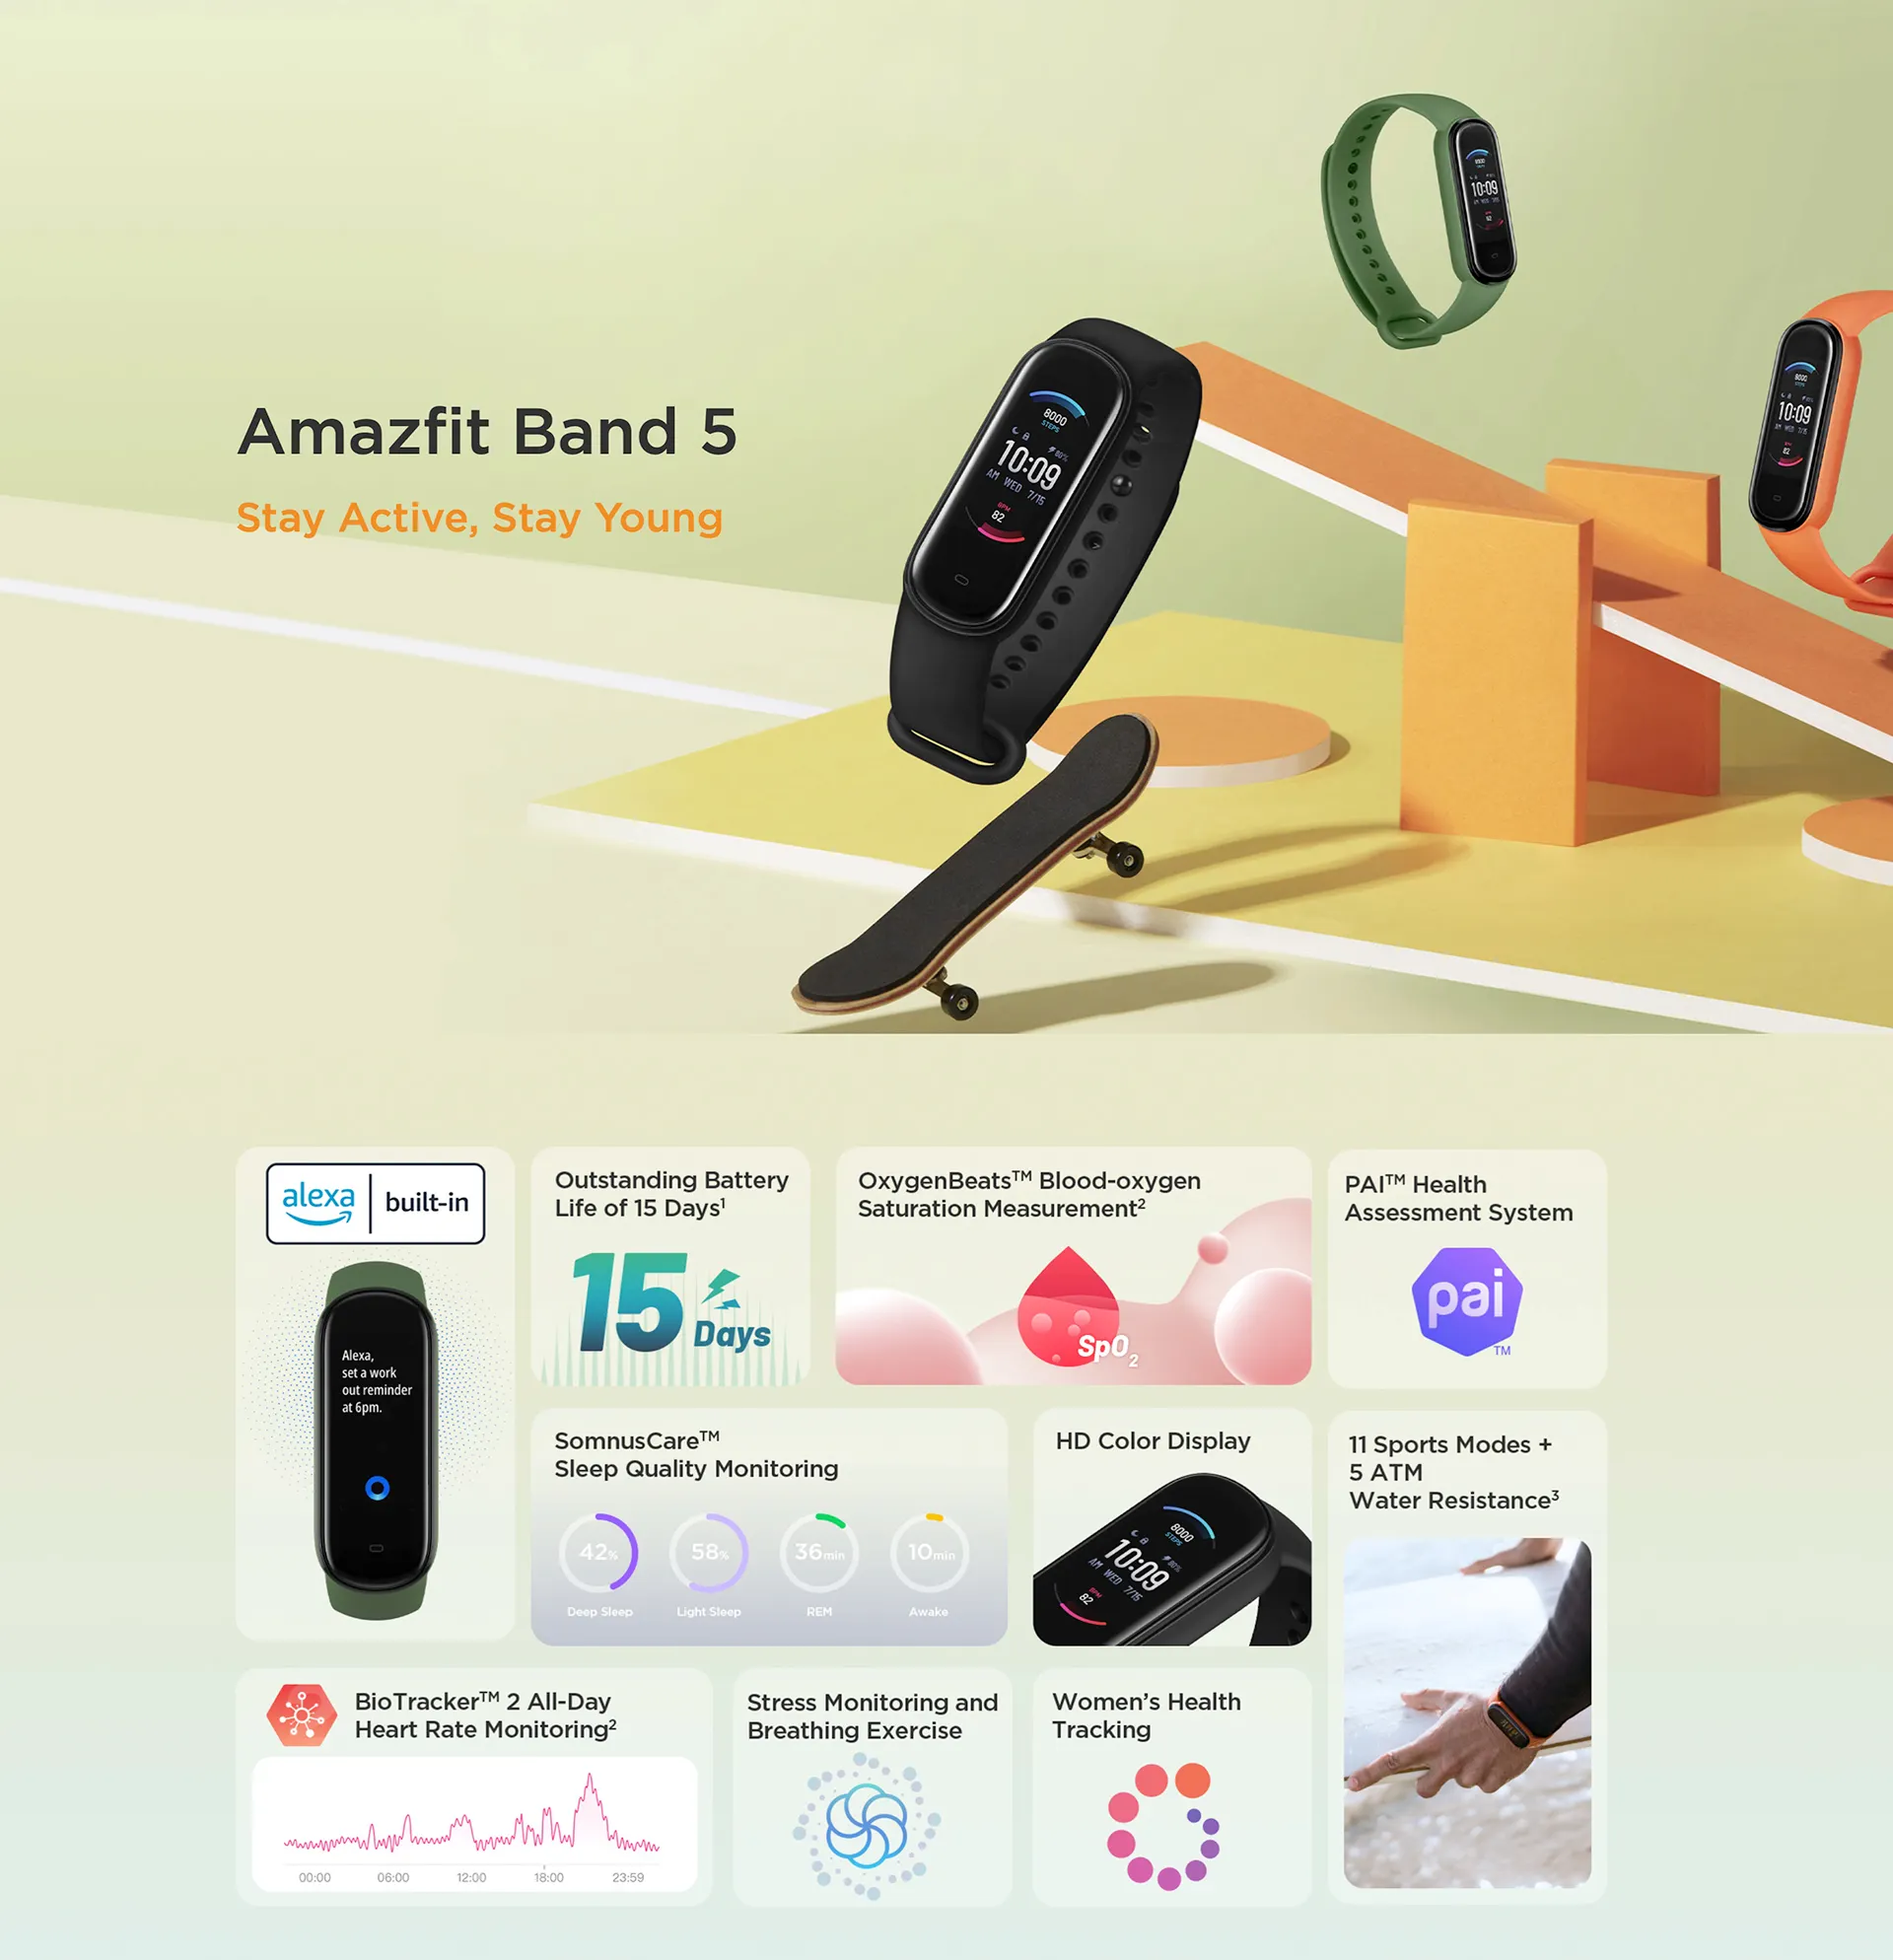 Amazfit Band 5 Smart fitness tracker with spO2